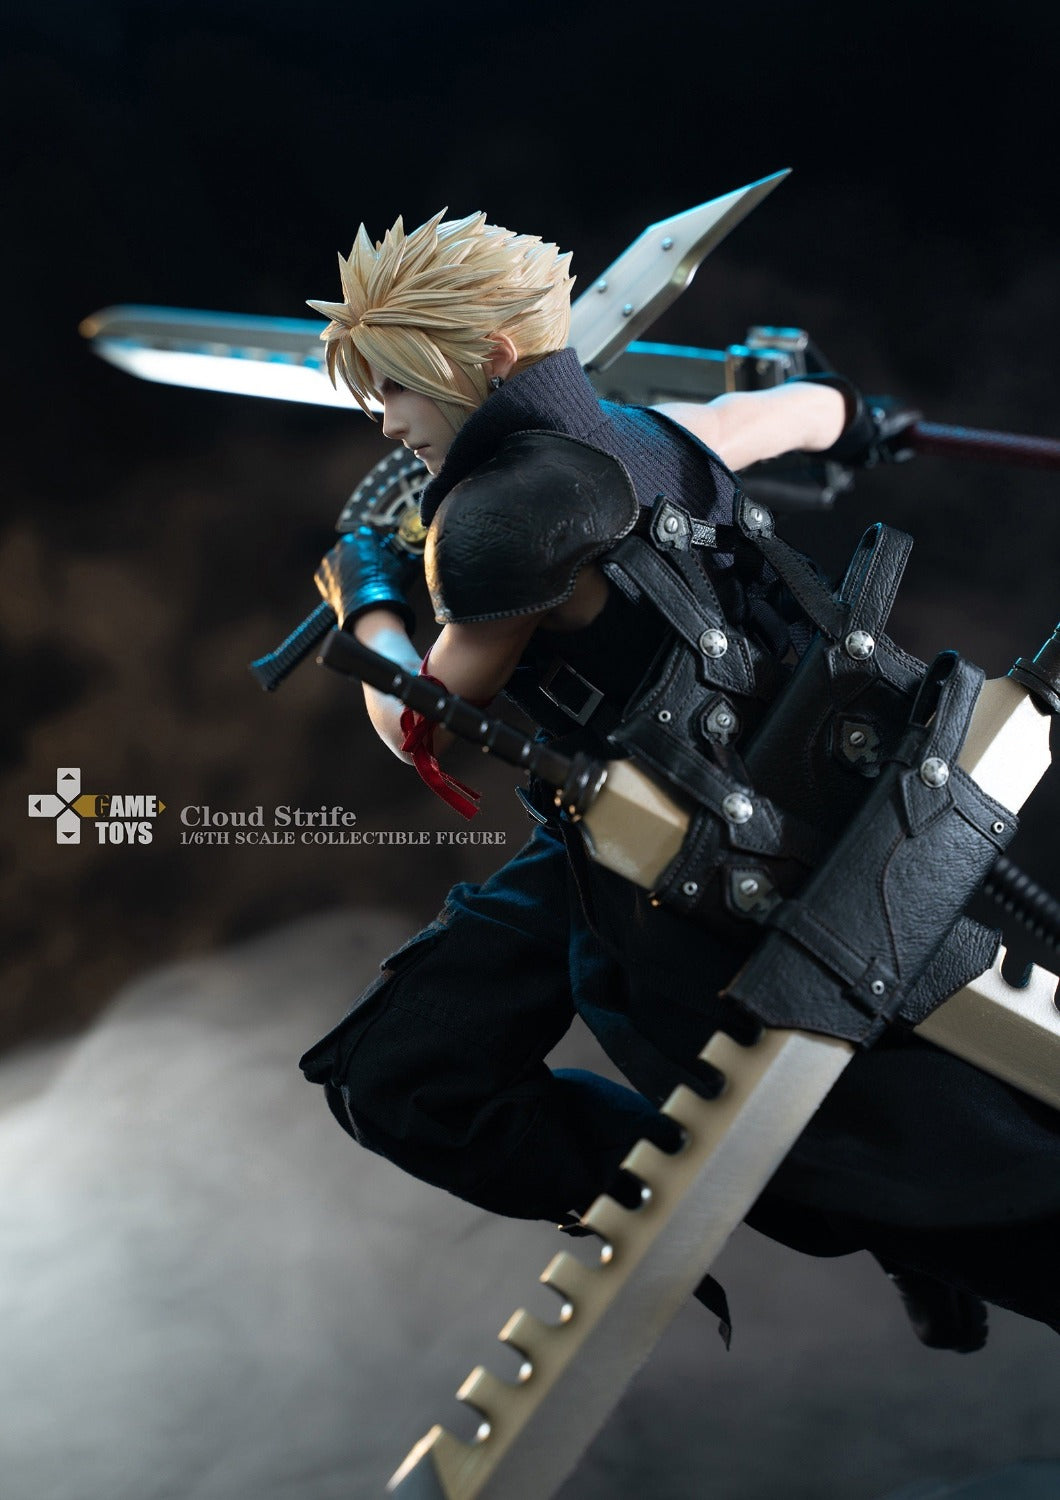 GAMETOYS FINAL FANTASY 7 GT-006C CLOUD STRIFE & FENRIR - Anotoys Collectibles